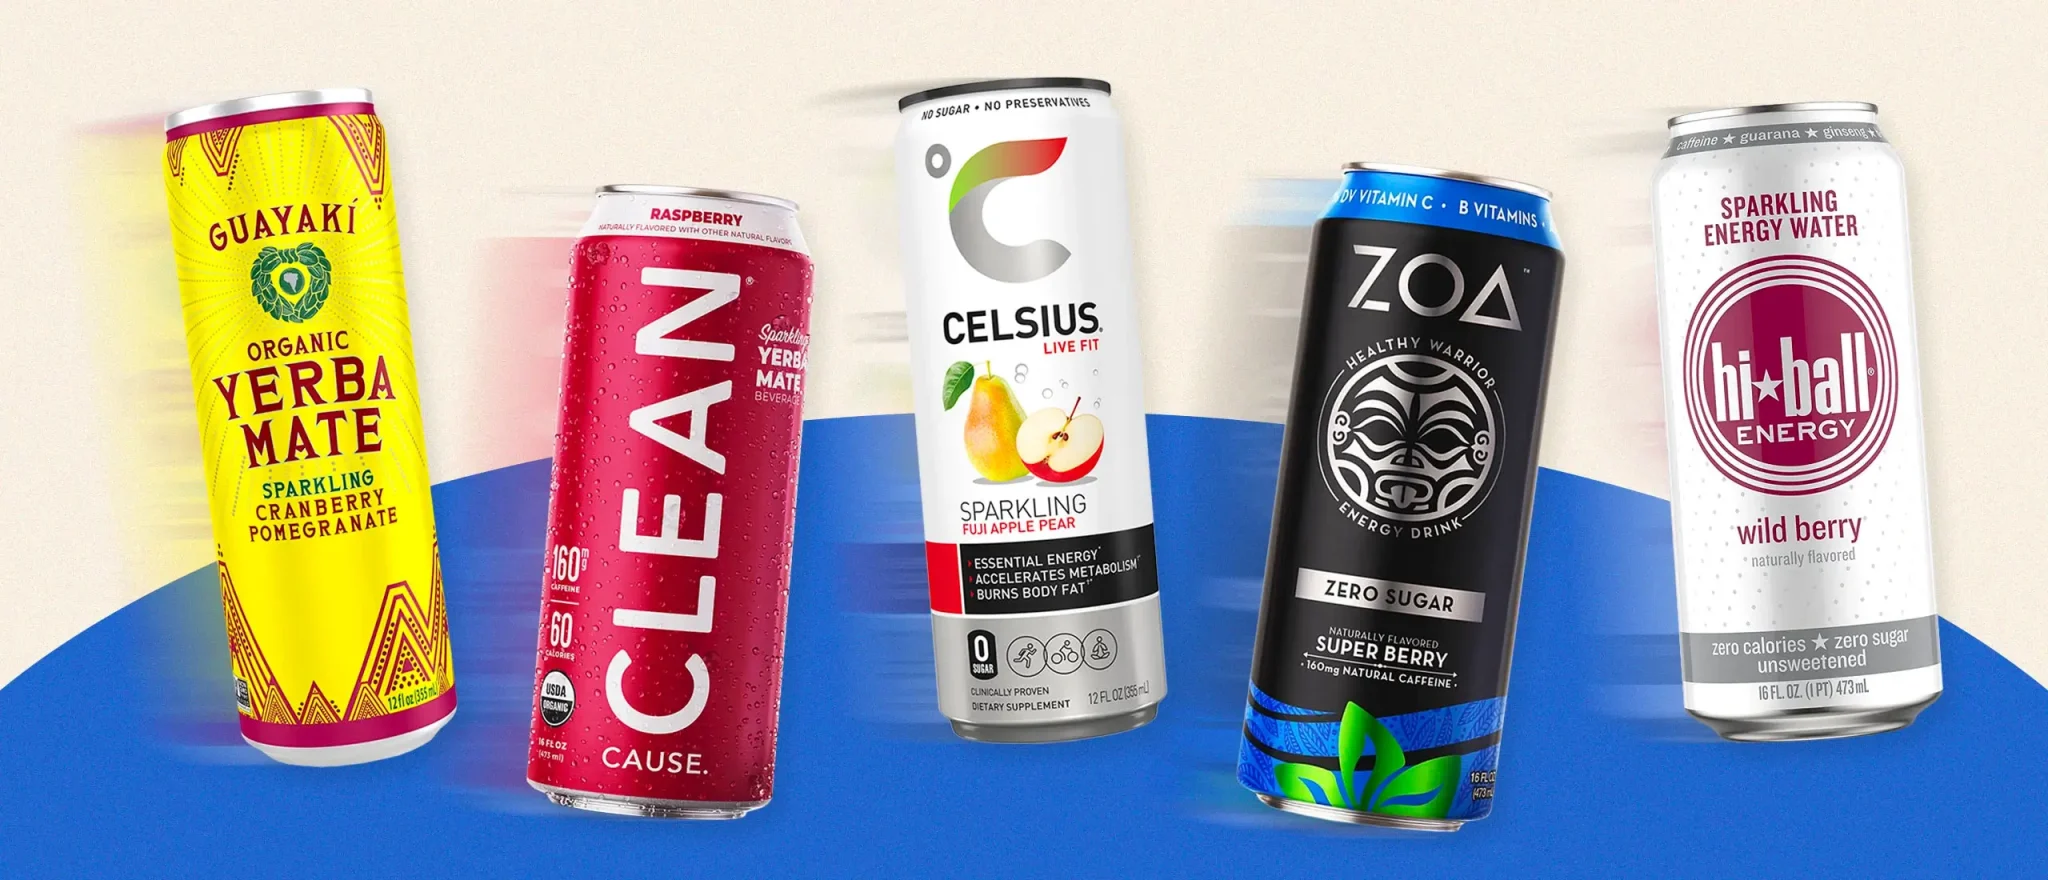 If You *Must* Have an Energy Drink, These 8 Healthier Options Will Do